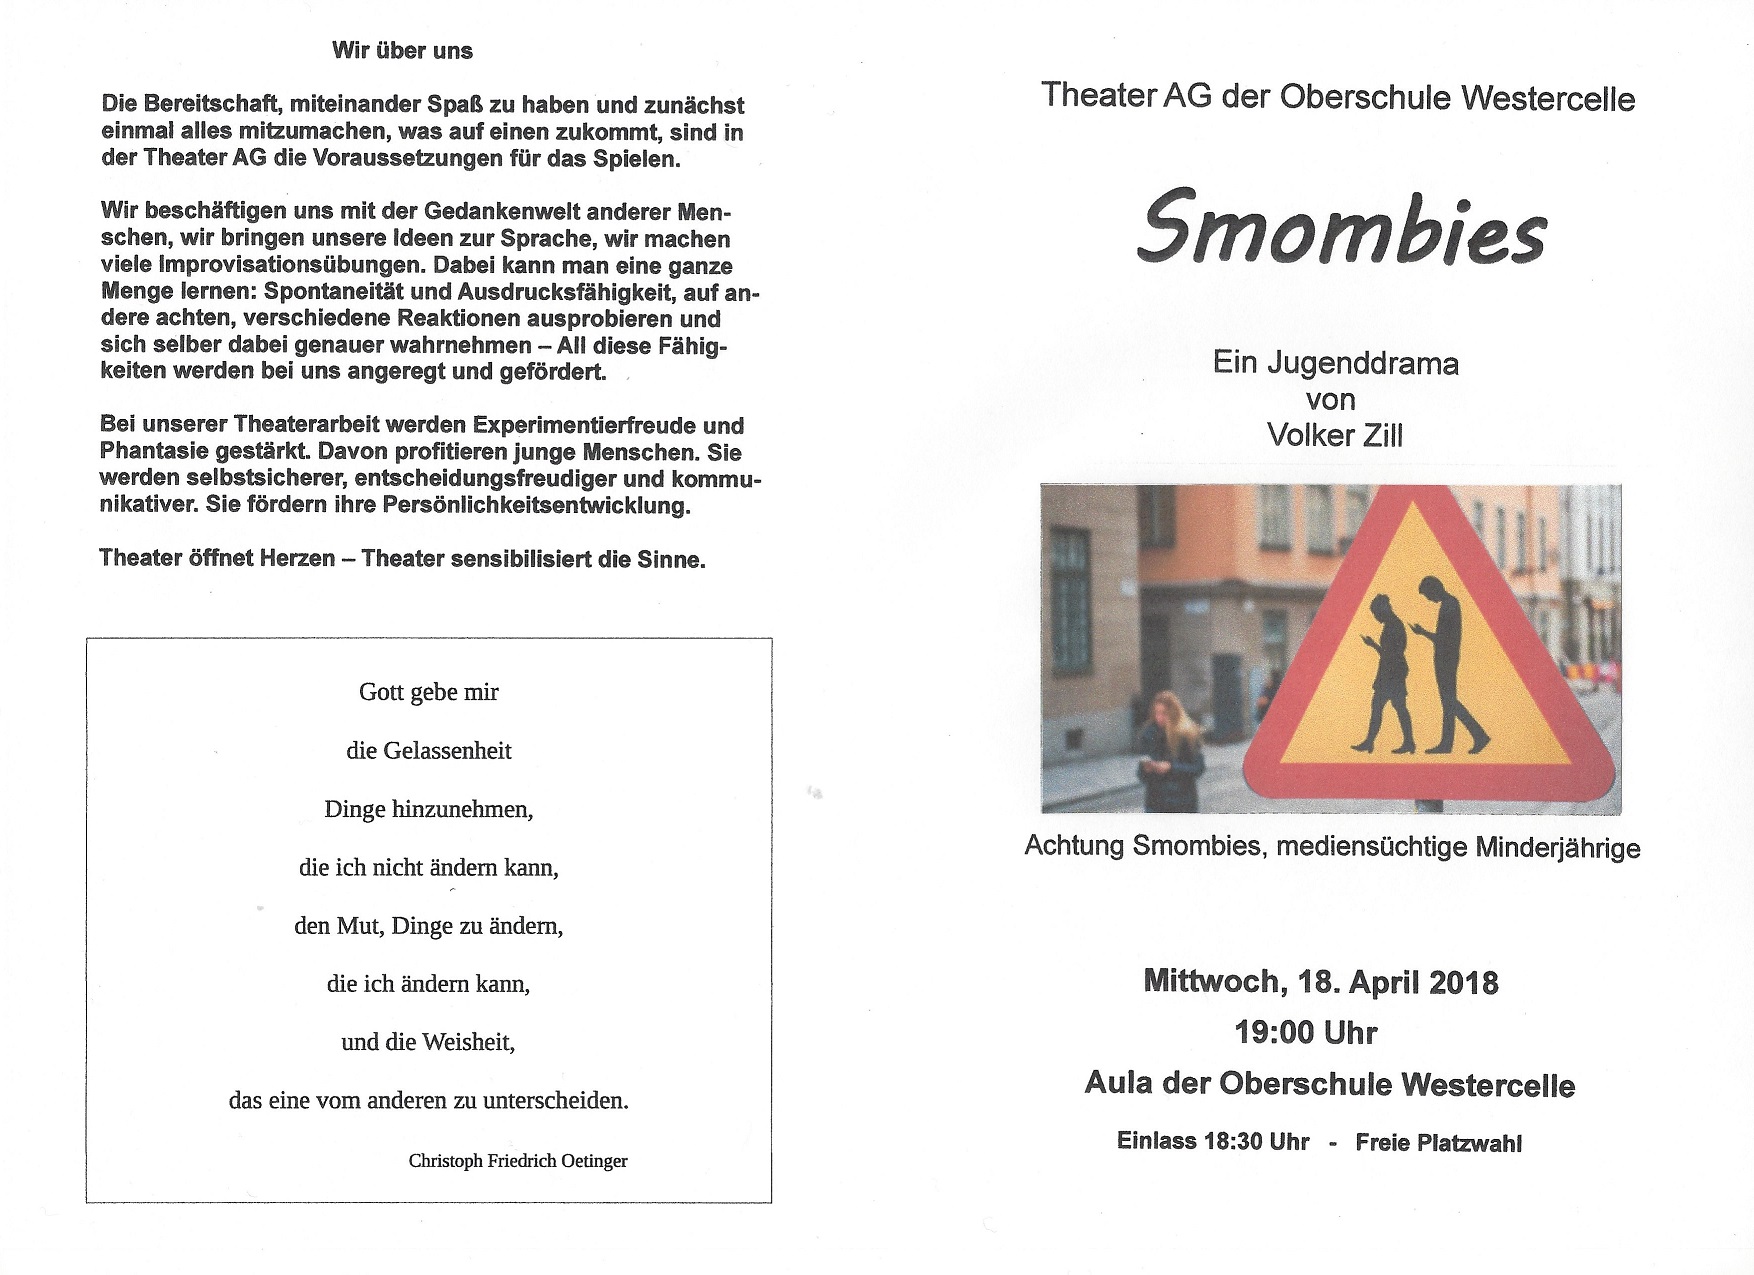 ObS Westercelle Theater AG Smombies 2018